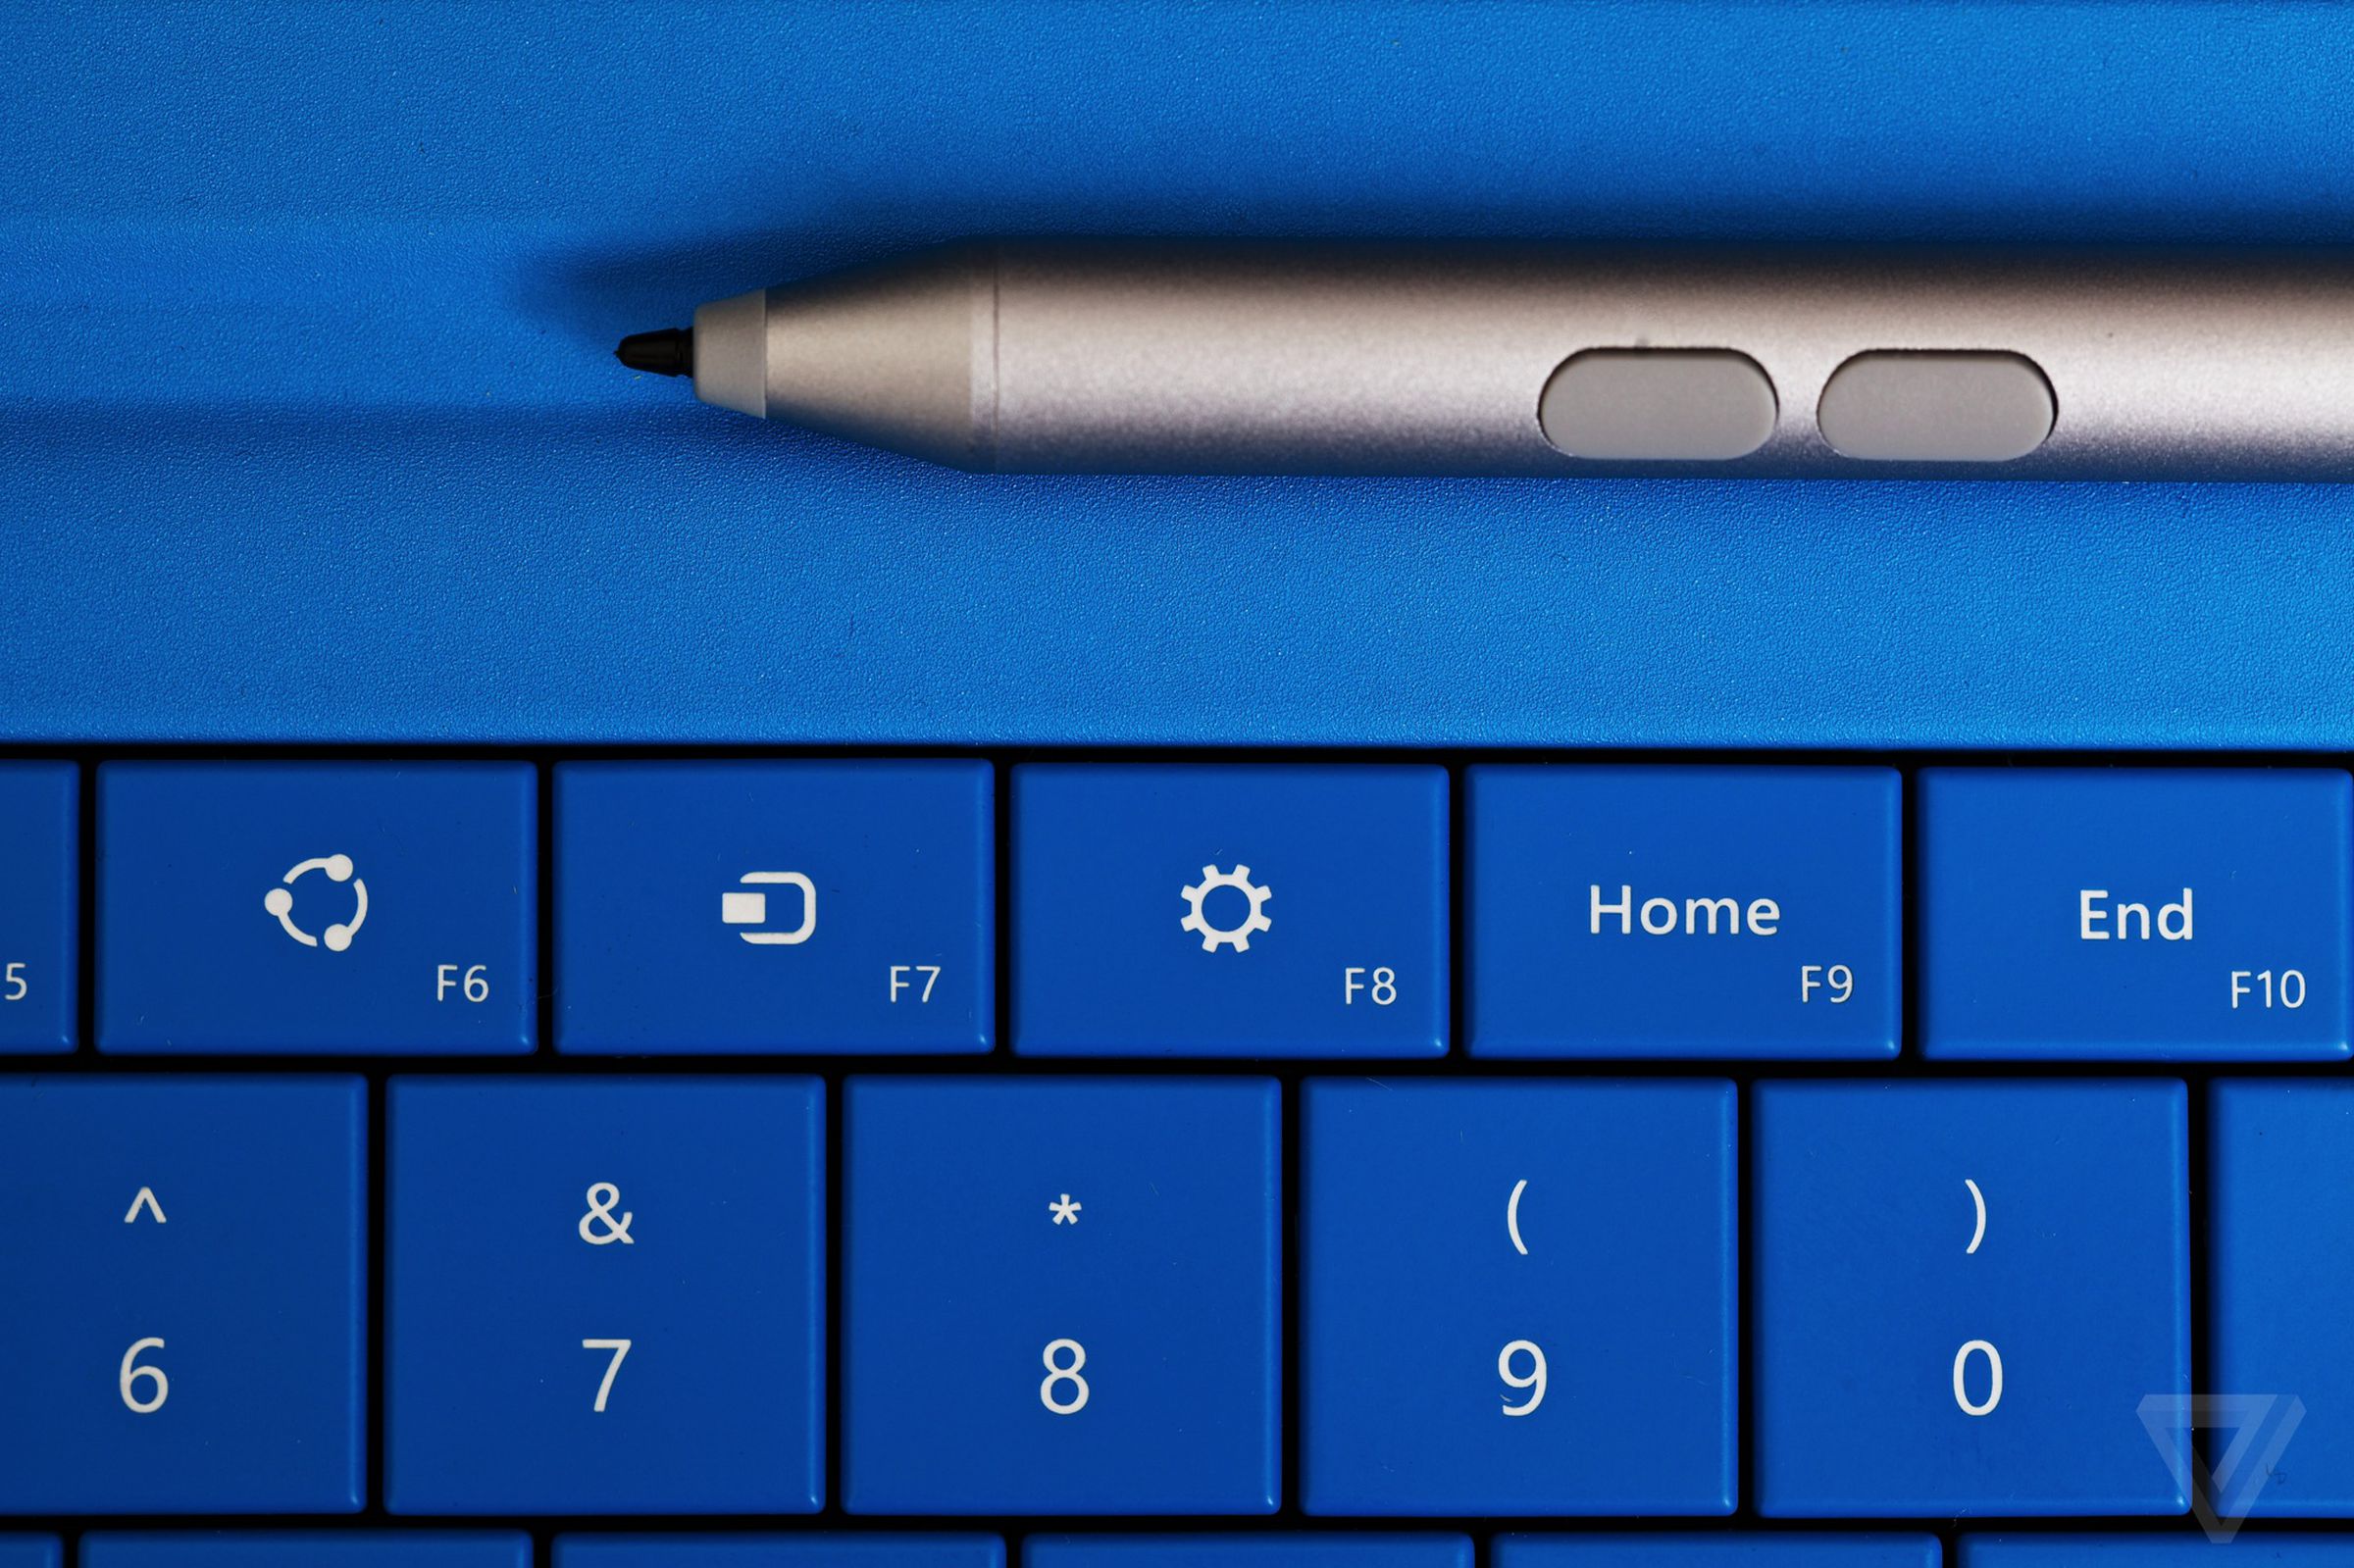 The all new Microsoft Surface Pro 3 in photos